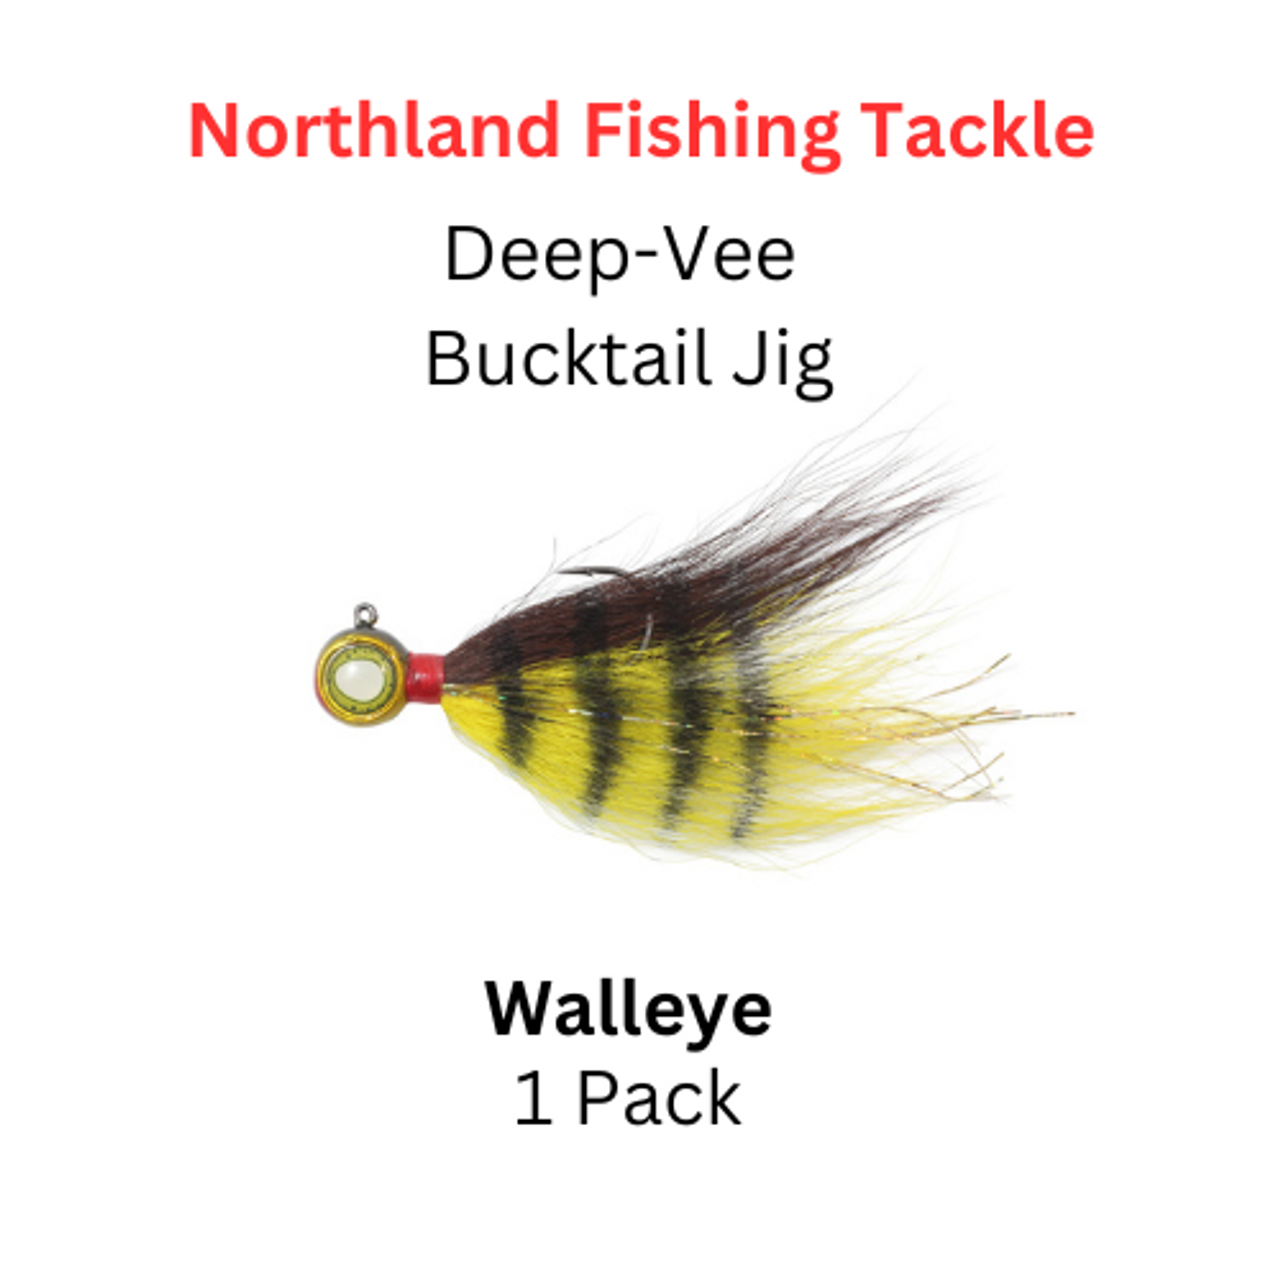 https://cdn11.bigcommerce.com/s-u9nbd/images/stencil/1280x1280/products/6471/16688/Northland_Fishing_tackle_Deep_Vee_bucktail_Jig_Walleye_1_pack___65650.1679359607.png?c=2